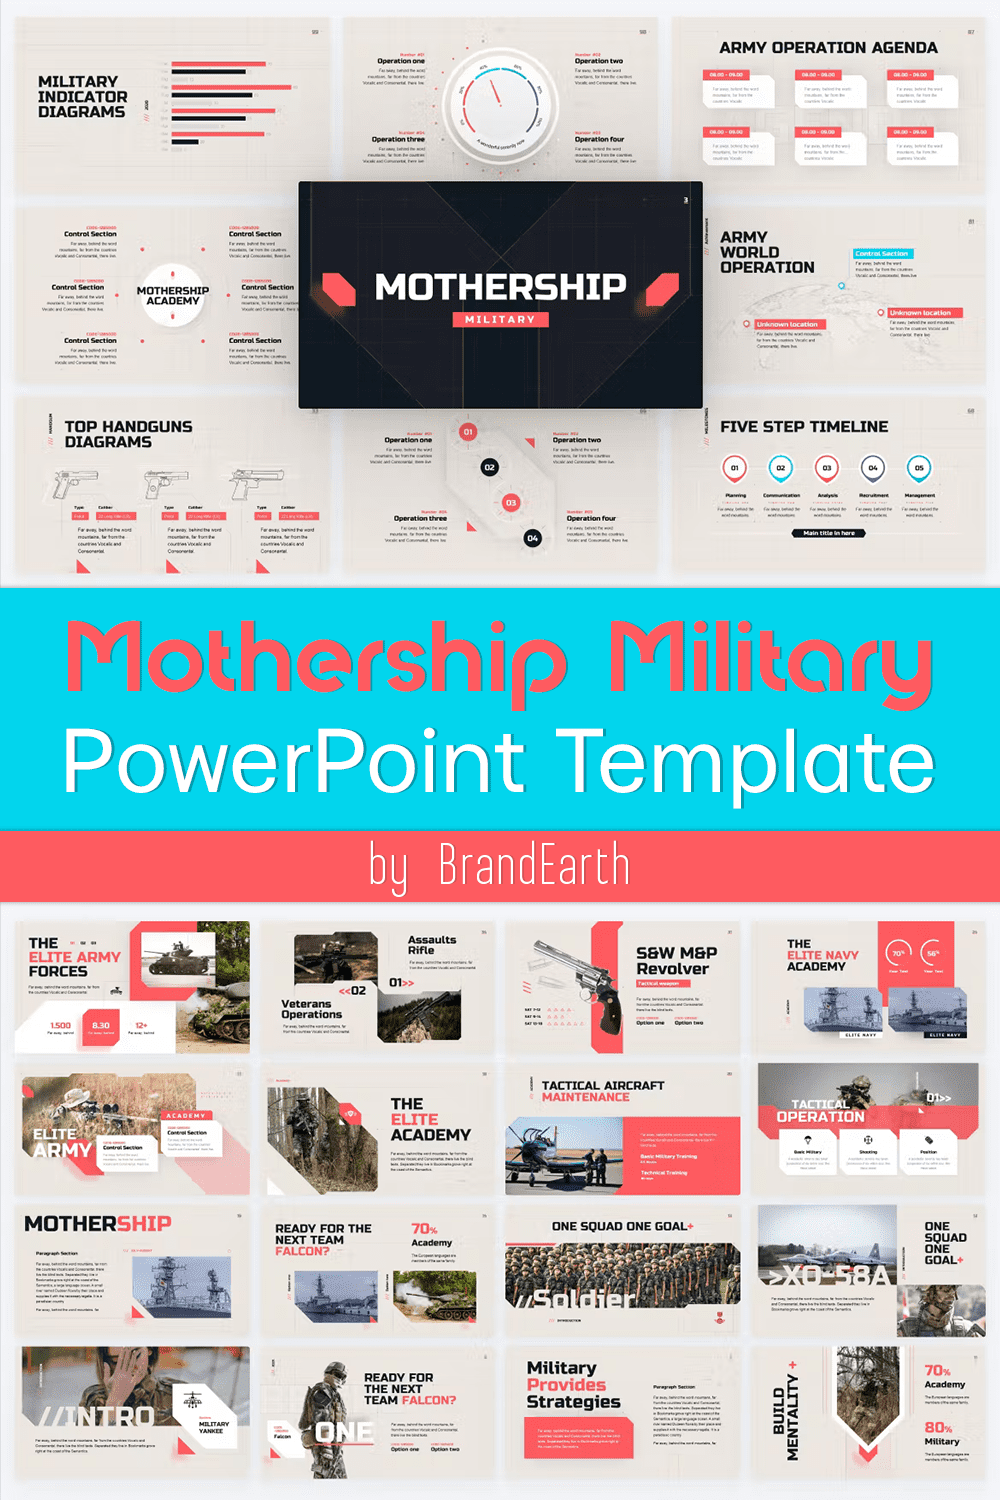 Mothership Military PowerPoint Template - Pinterest.